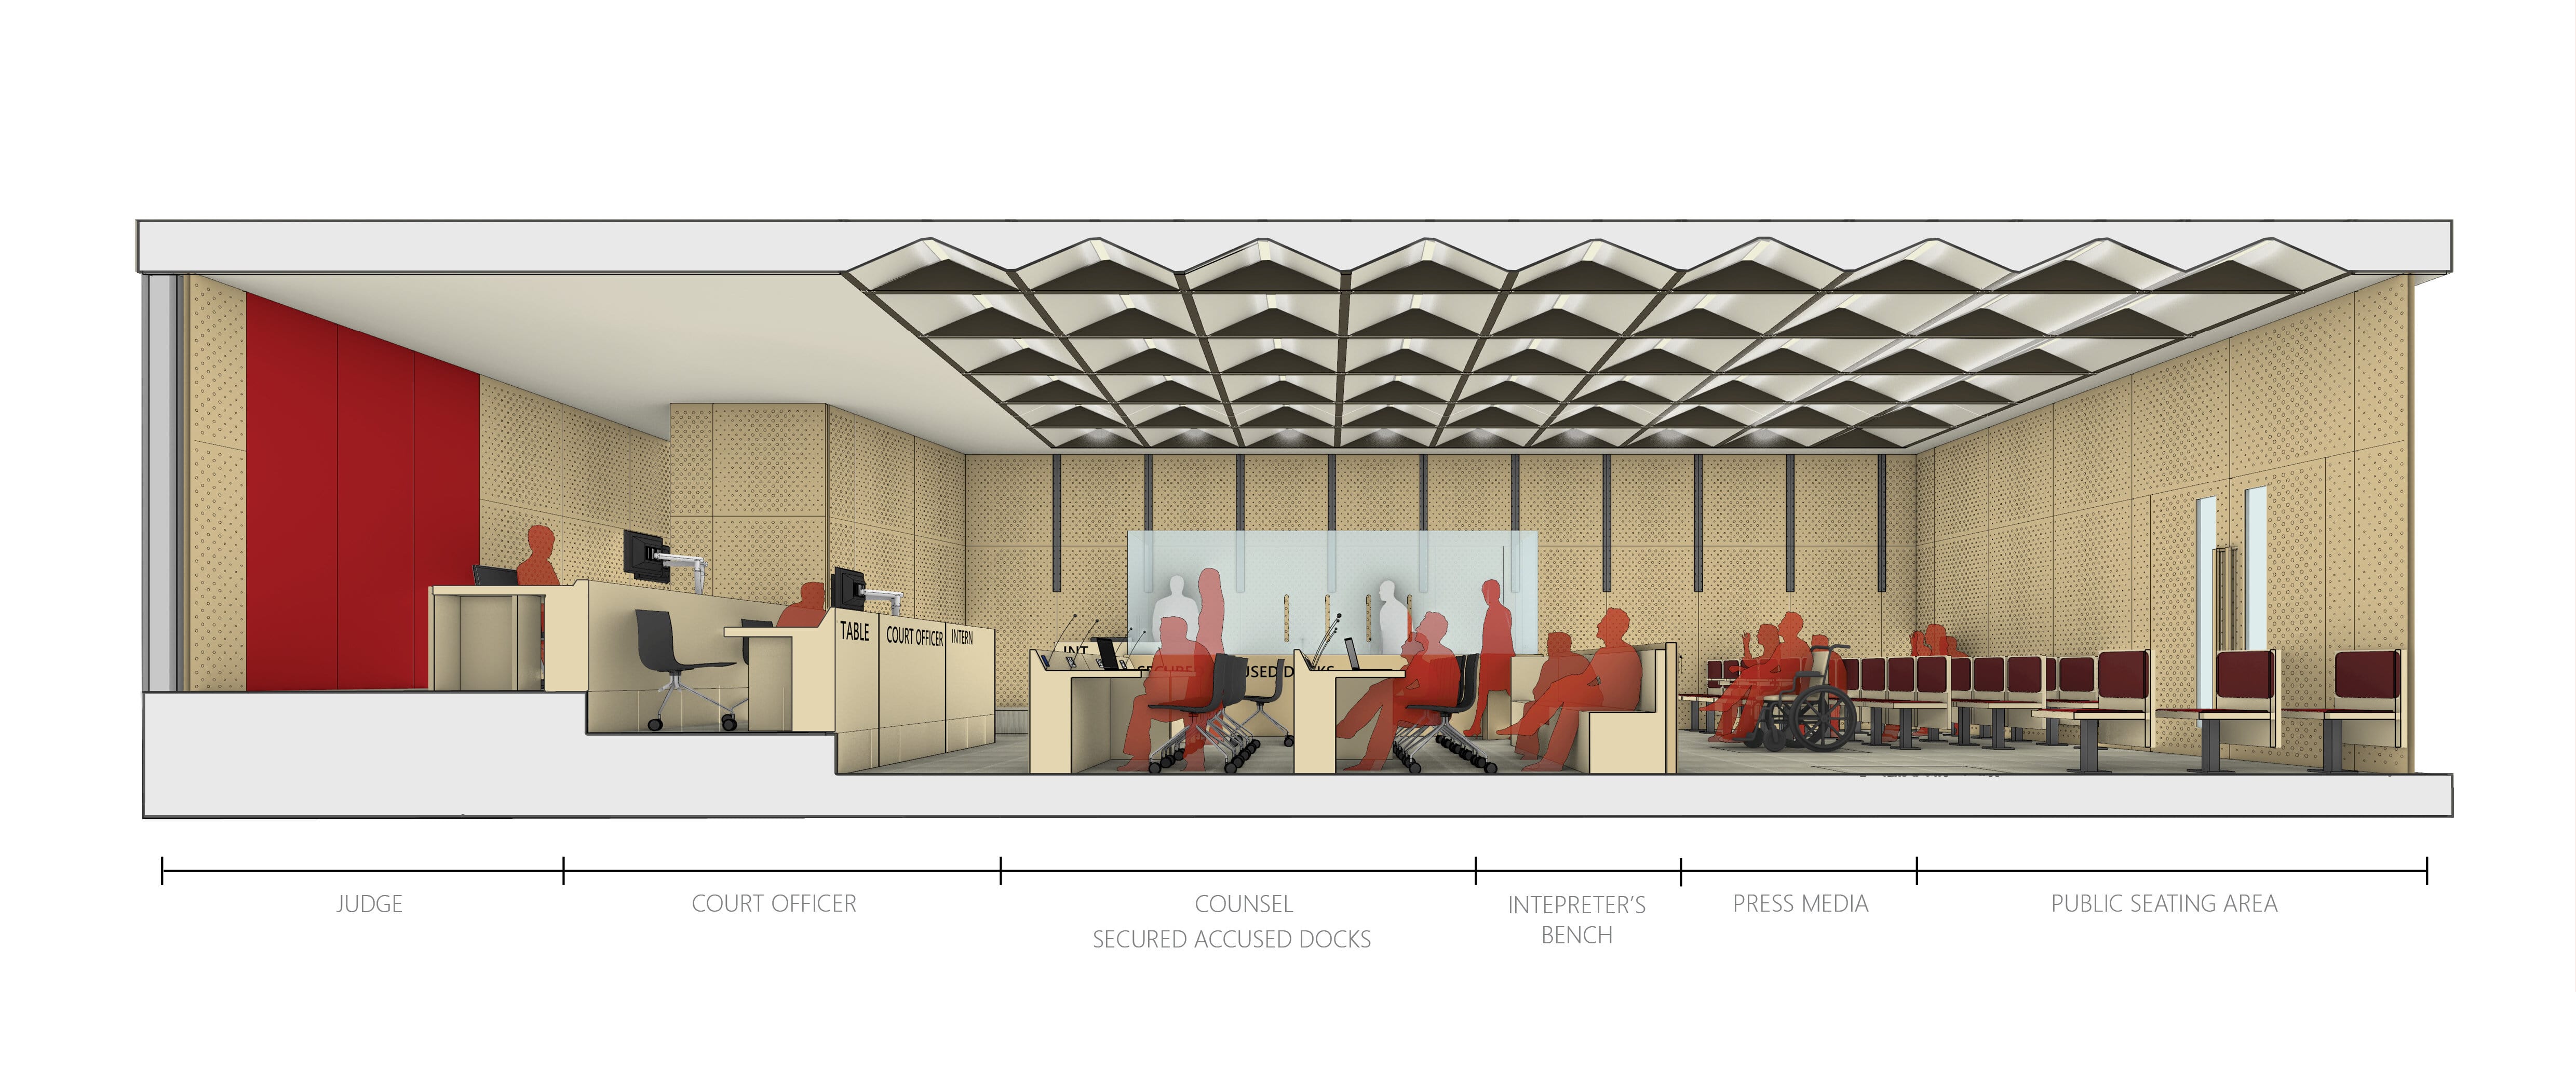 Illustration of Interior of New State Courts, Singapore